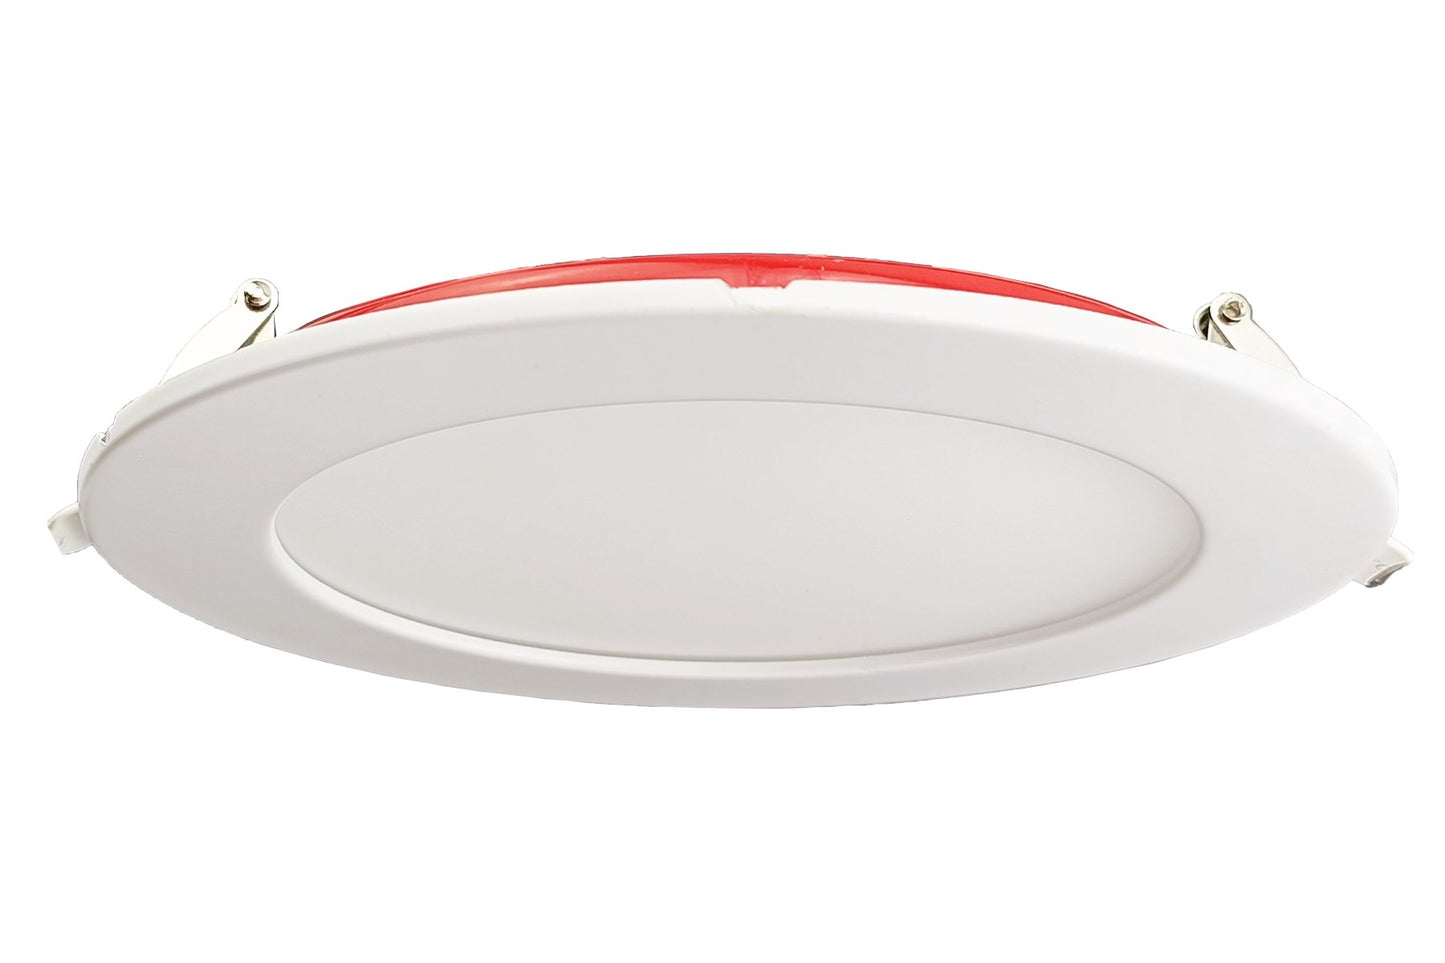 GDL-G96924Goodlite G-96924 6" 18W LED Round Recessed Slim Spotlight Selectable CCT Fire Rated